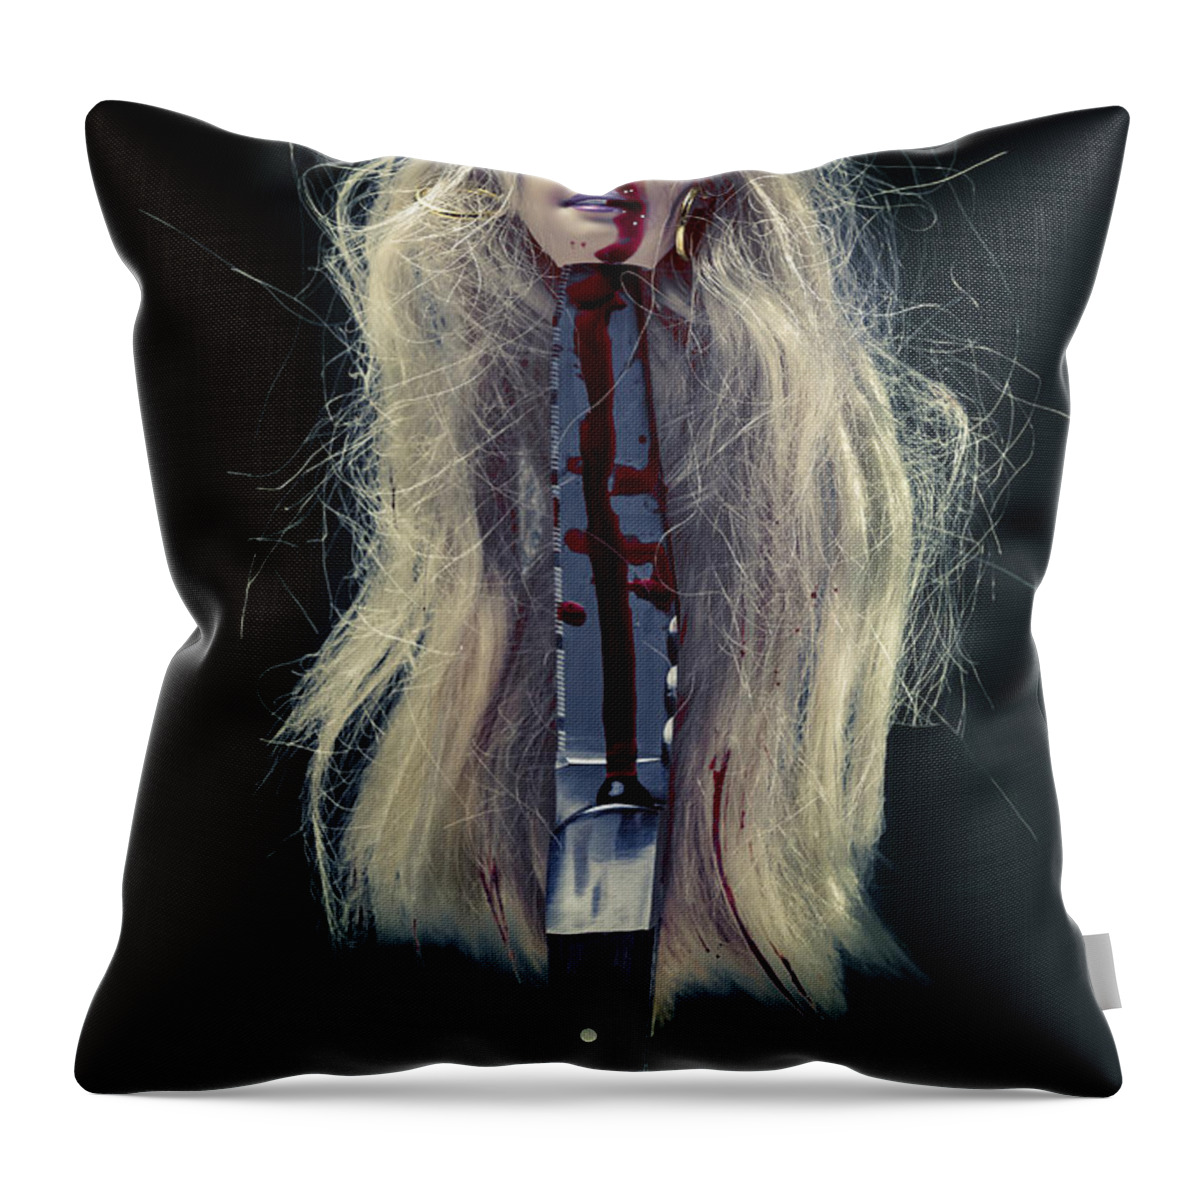 Head Throw Pillow featuring the photograph Head And Knife by Joana Kruse